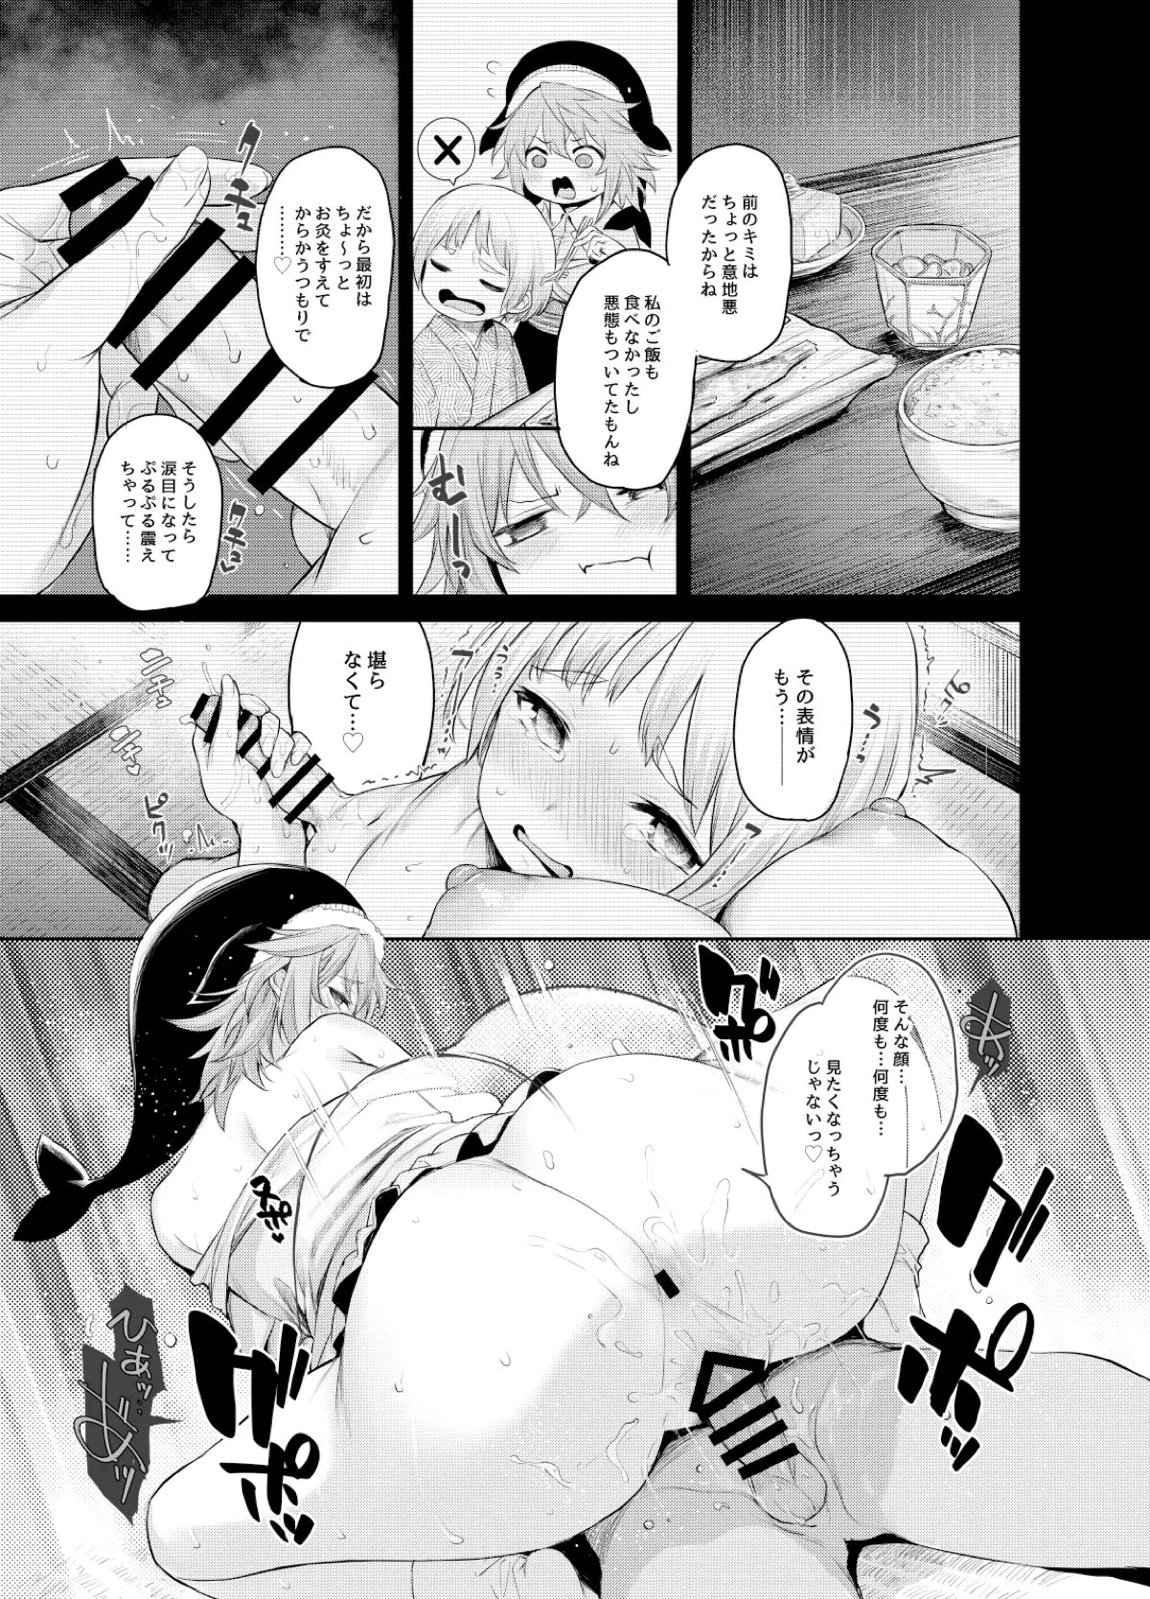 ANMITSU TOUHOU THE AFTER Vol 4 81ページ